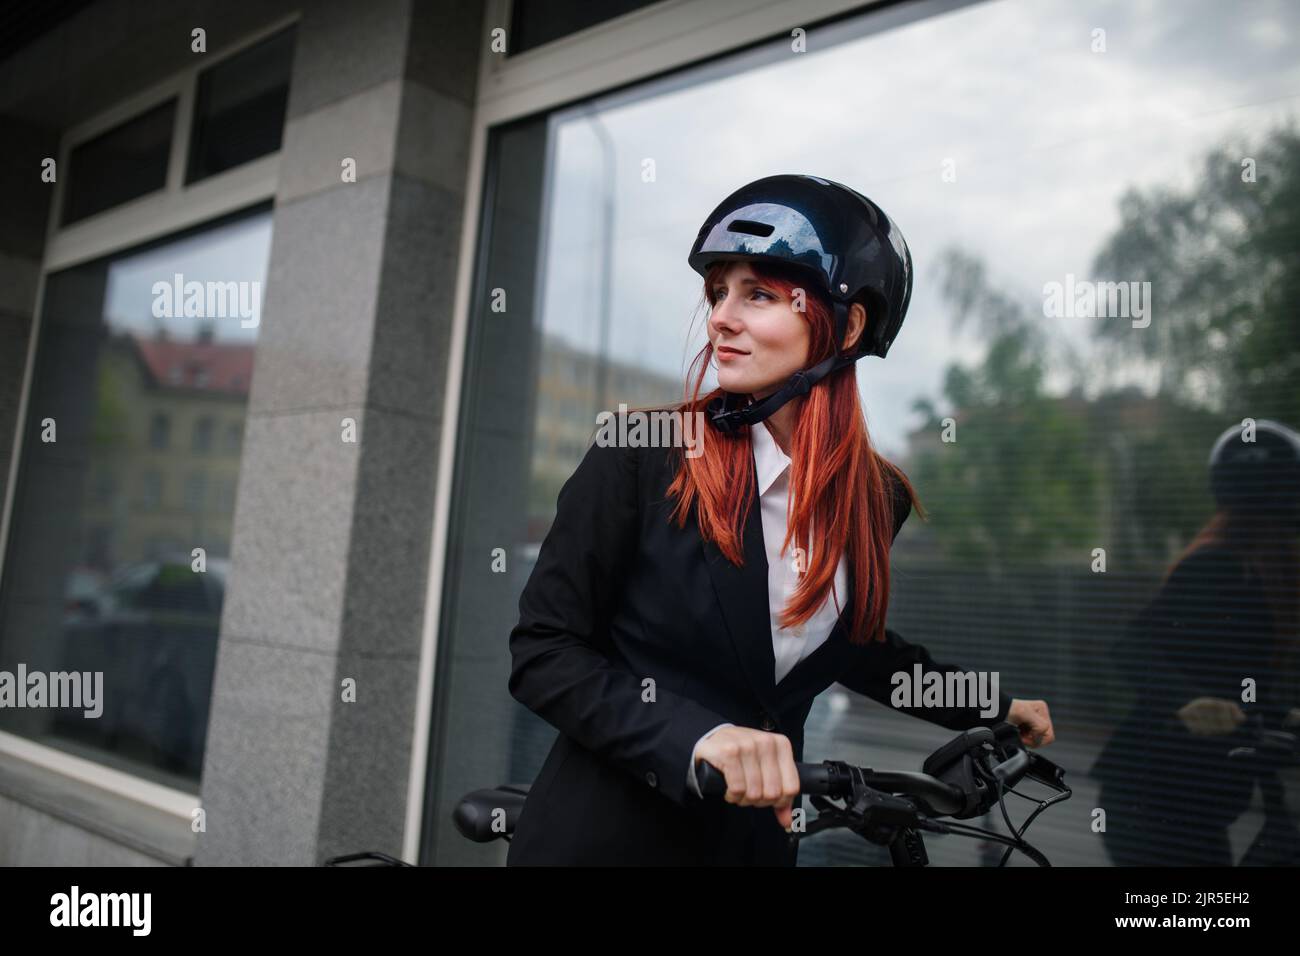 Portrait of businesswoman commuter on the way to work with bike, sustainable lifestyle concept. Stock Photo